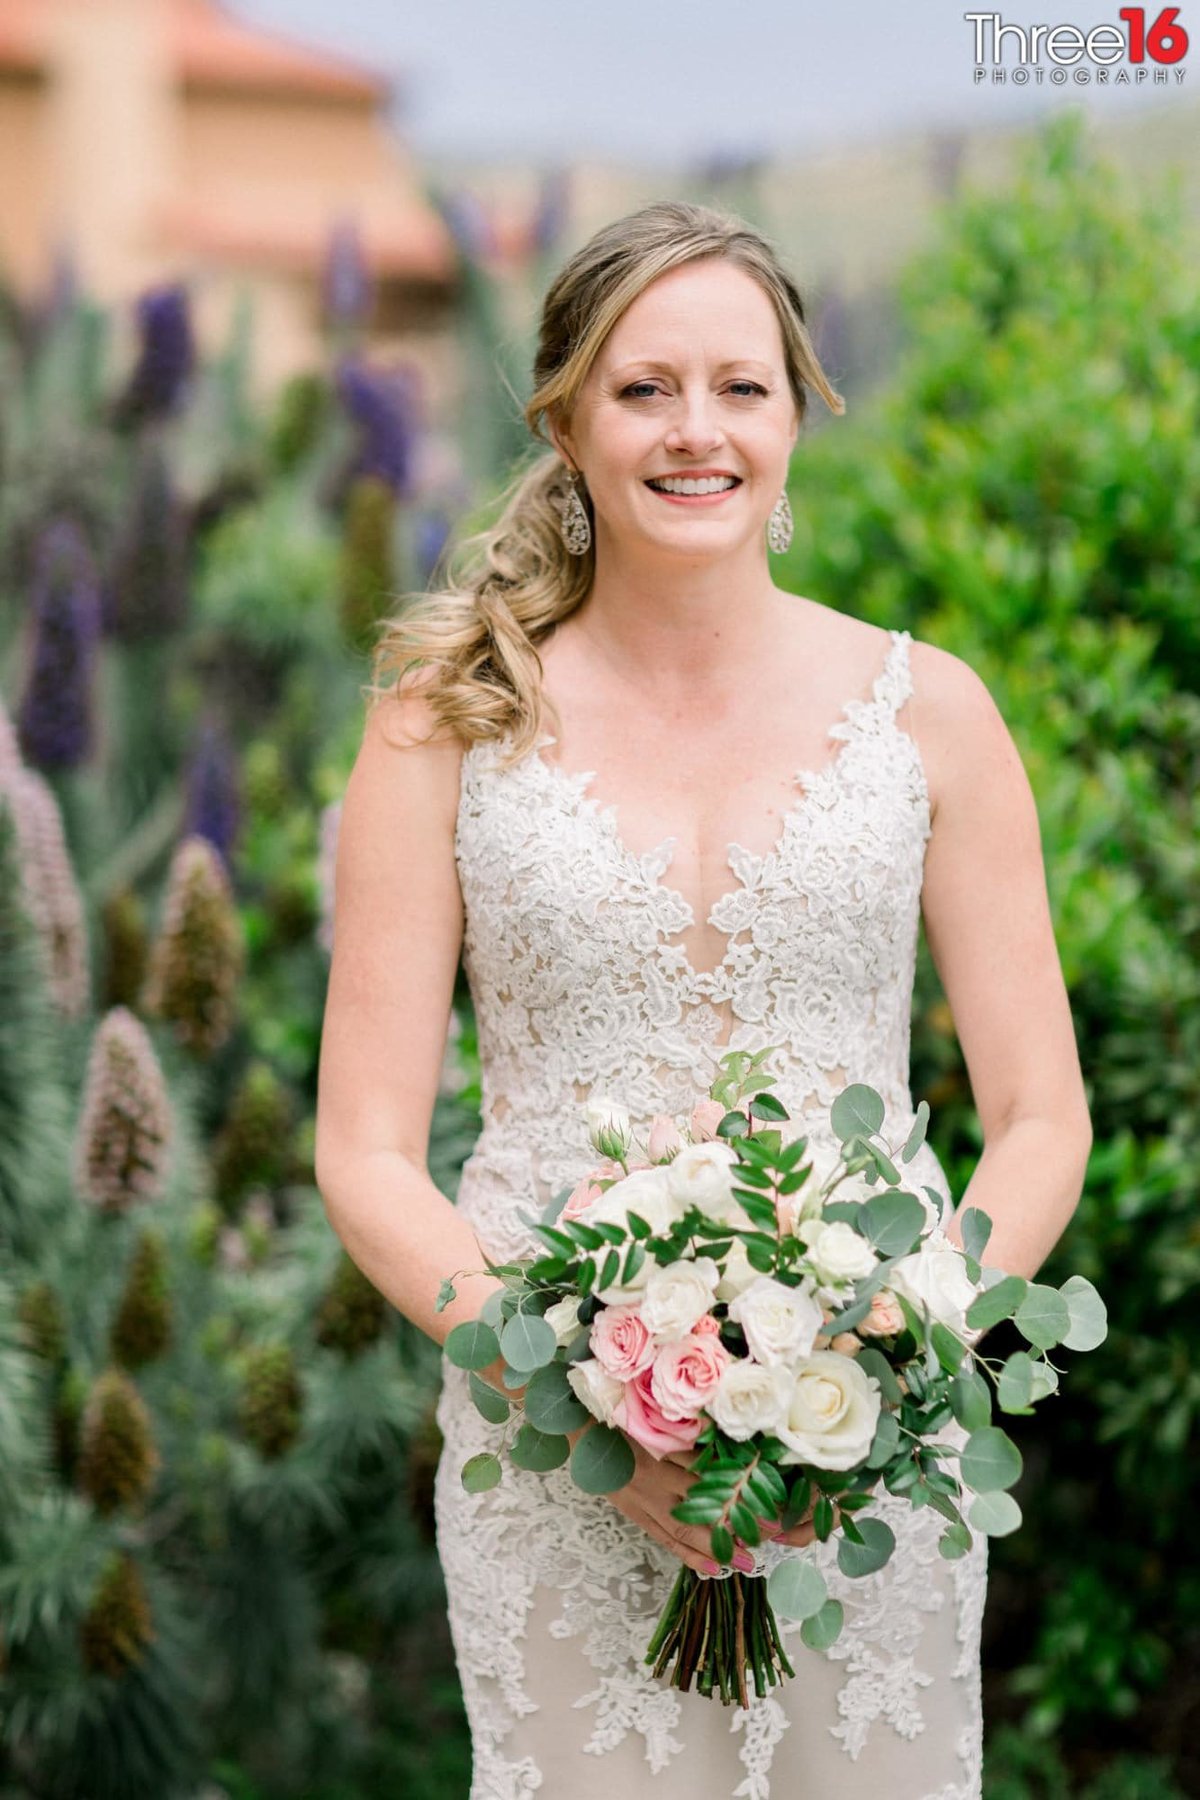 Bride poses with her beautiful bouquet of flowers